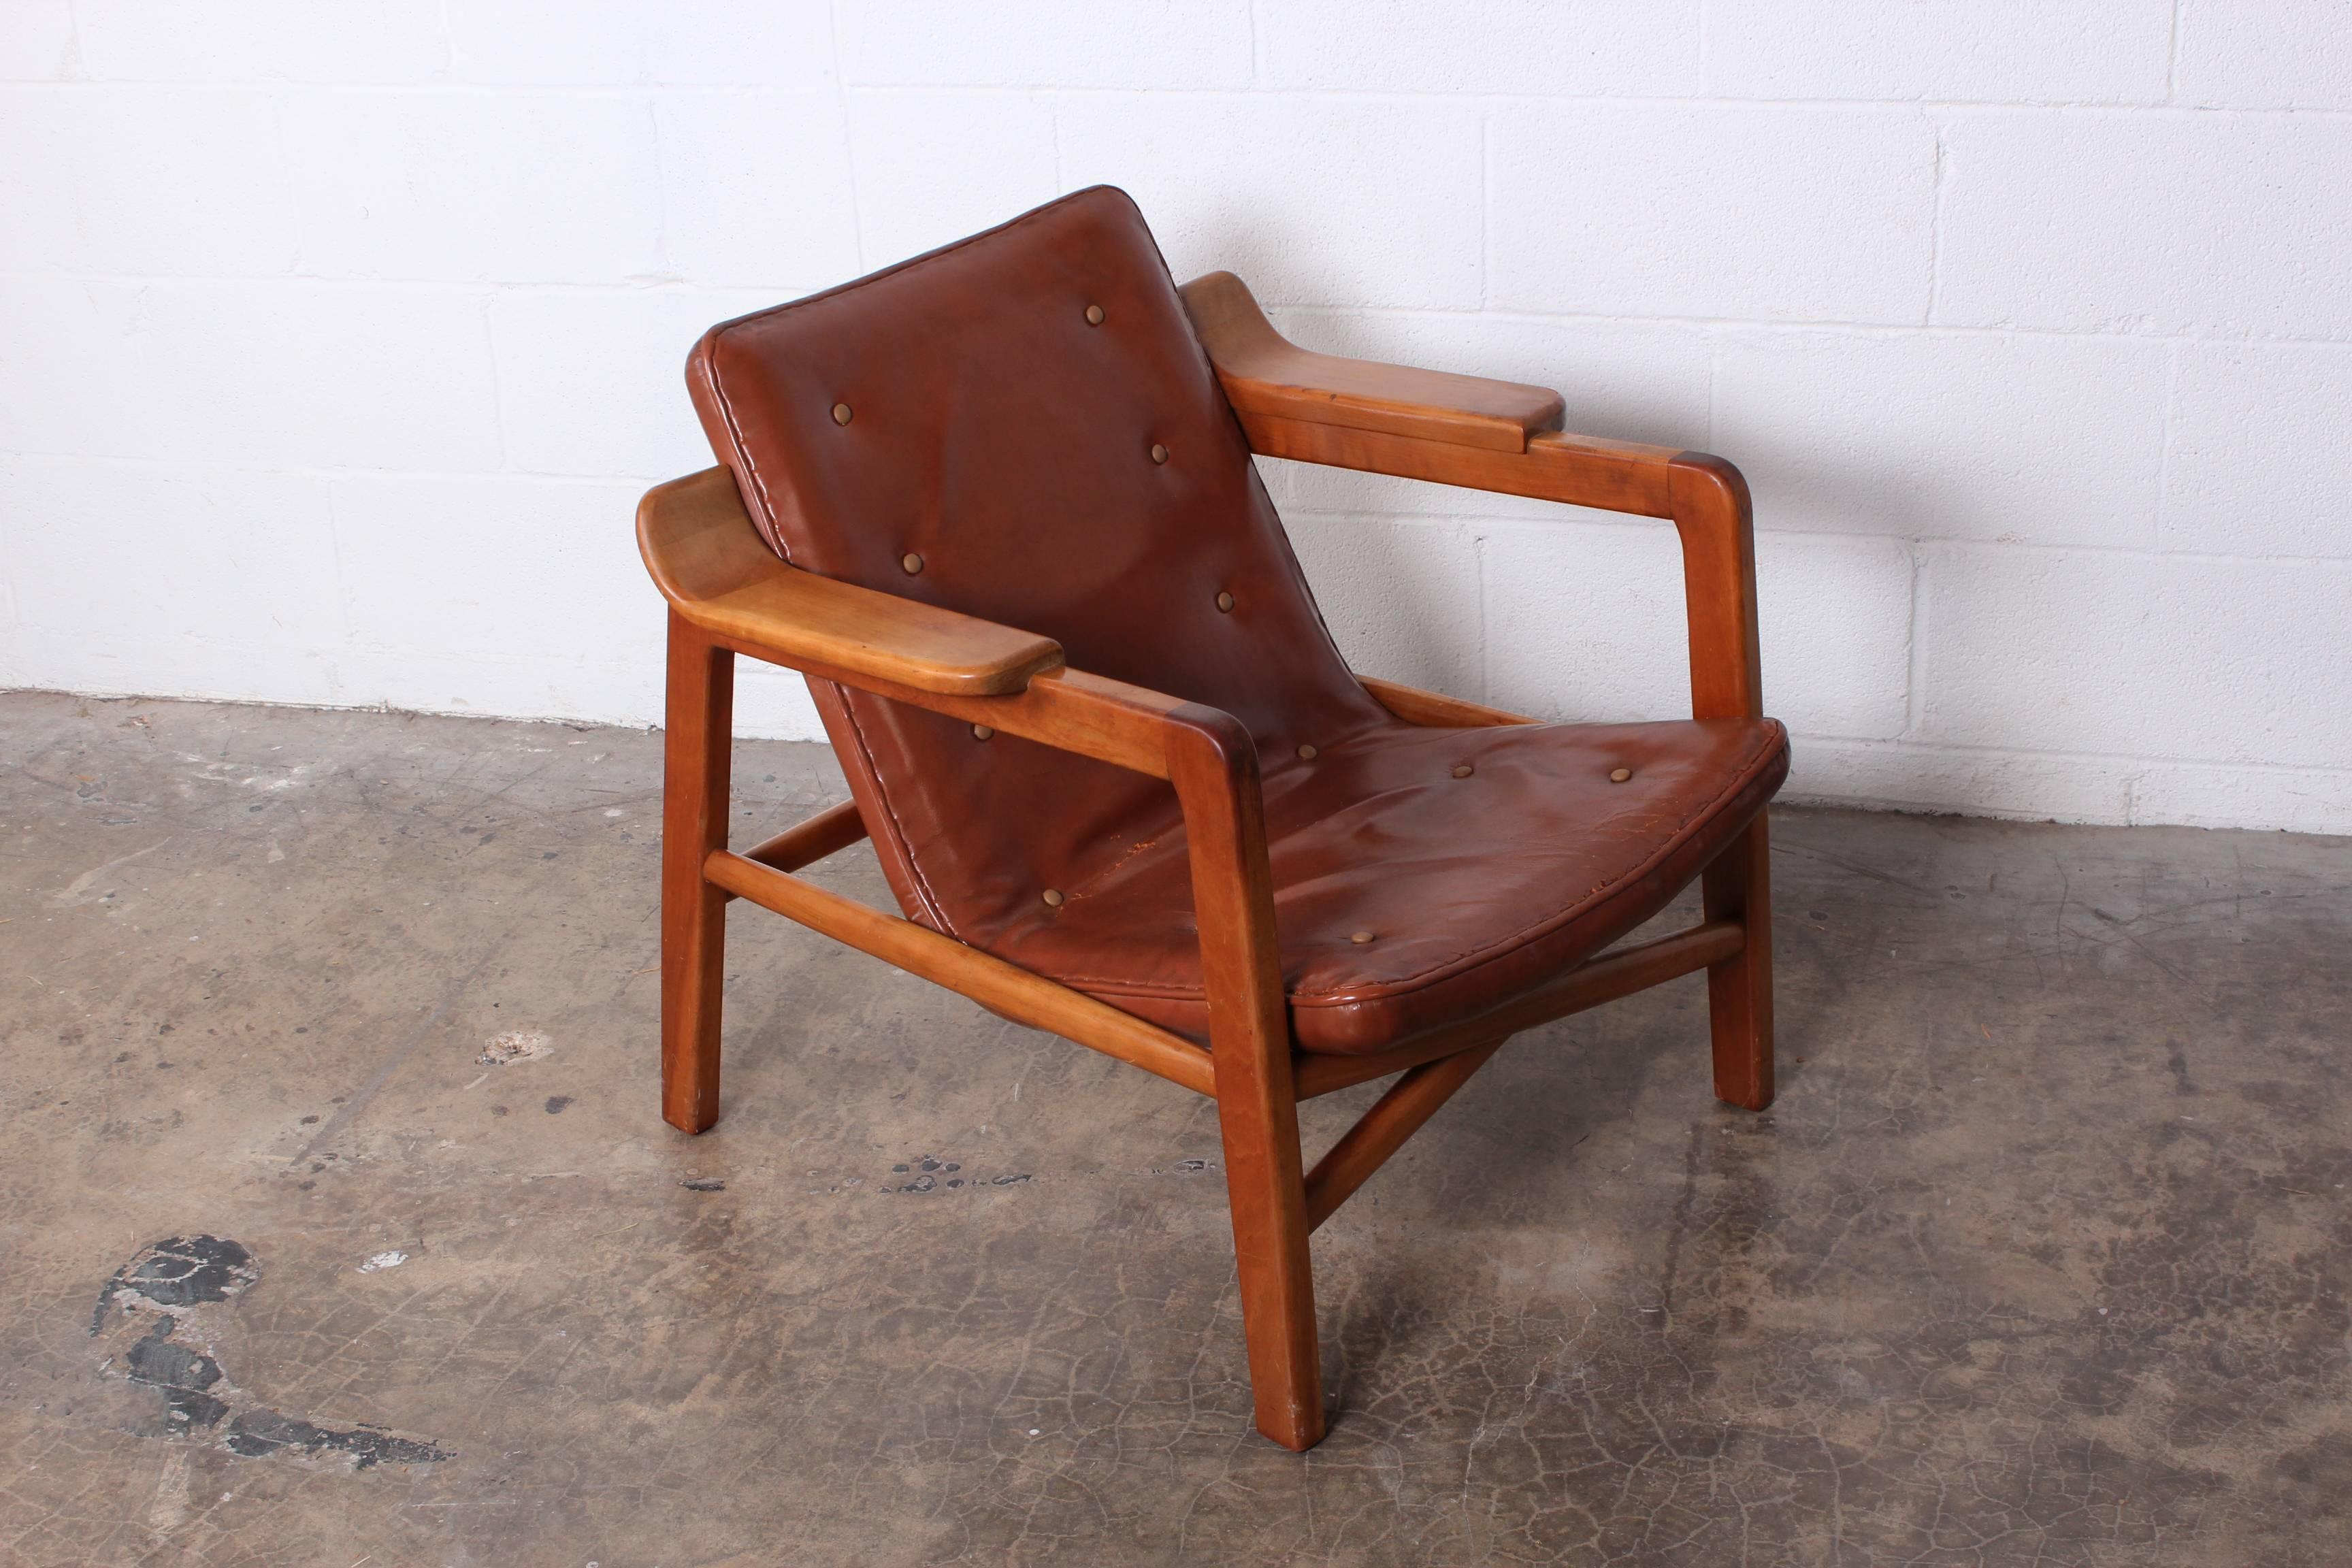 Mid-20th Century Tove & Edvard Kindt-Larsen 'Fireplace' Lounge Chair in Original Leather